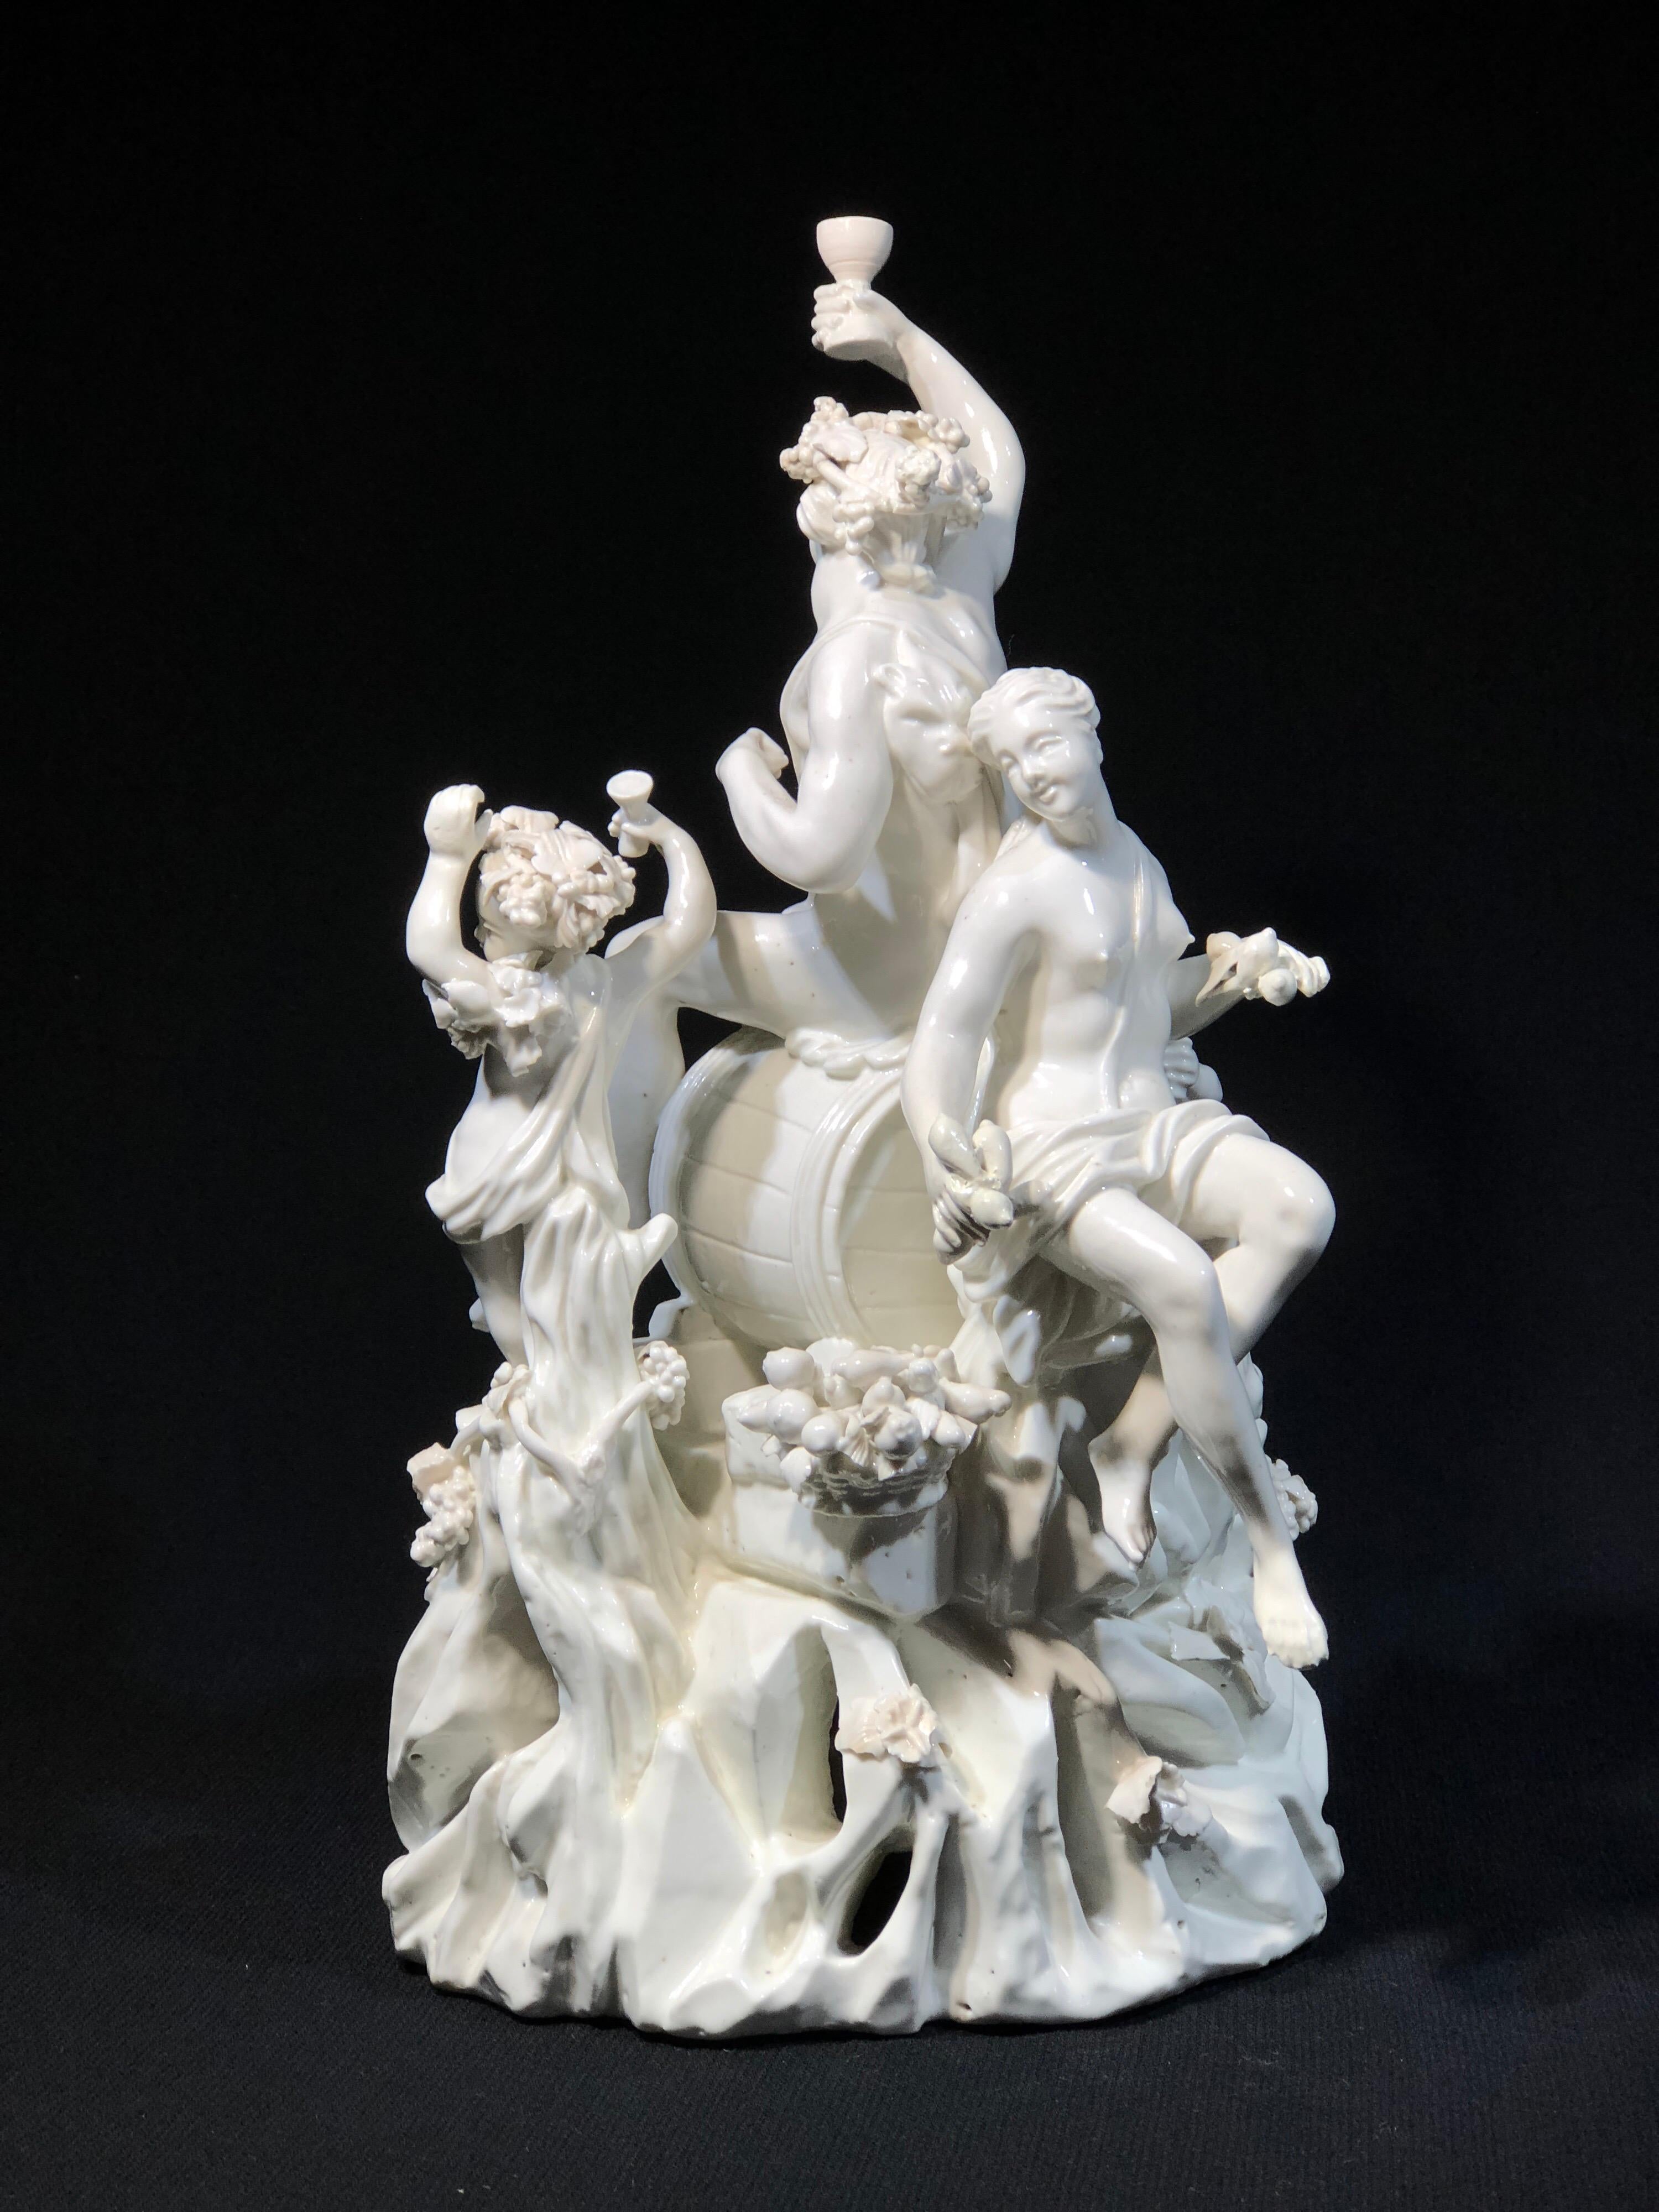 Large French porcelain group, depicting Bacchus and his revelling band, each with grapevines in their hair and a drink in hand, one re-filling from the barrel Bacchus is seated on, modelled in the round on a rocky mountain, overgrown with fruiting